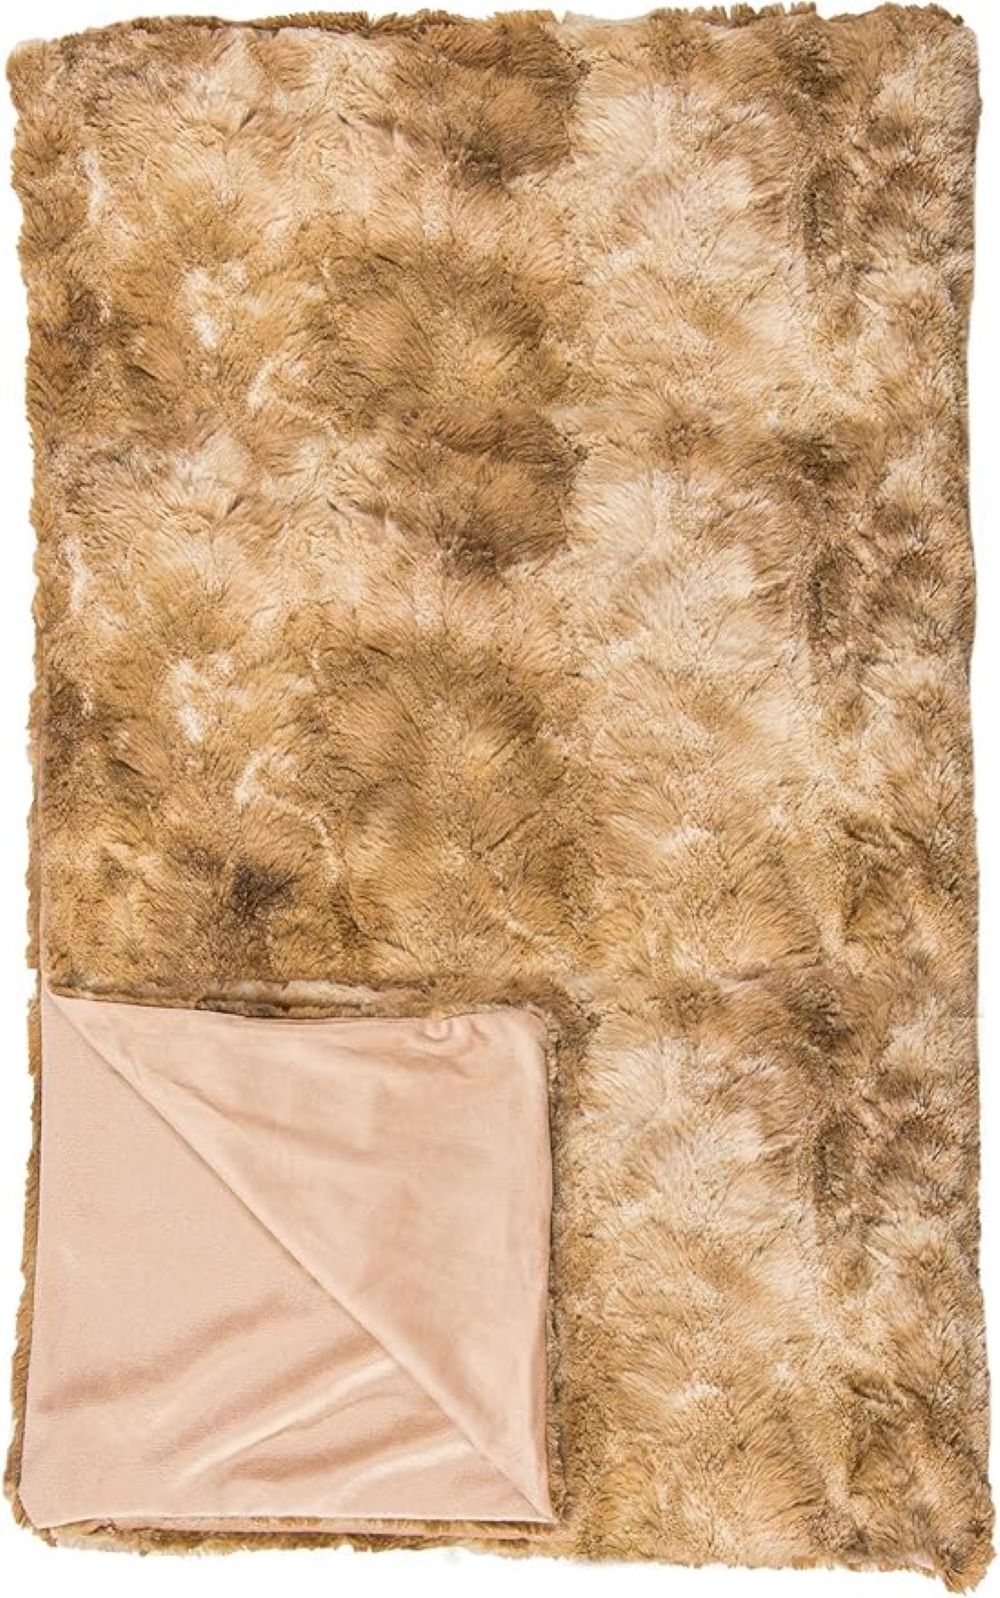 50" X 70" Taupe and Ivory Faux Fur Plush Throw Blanket